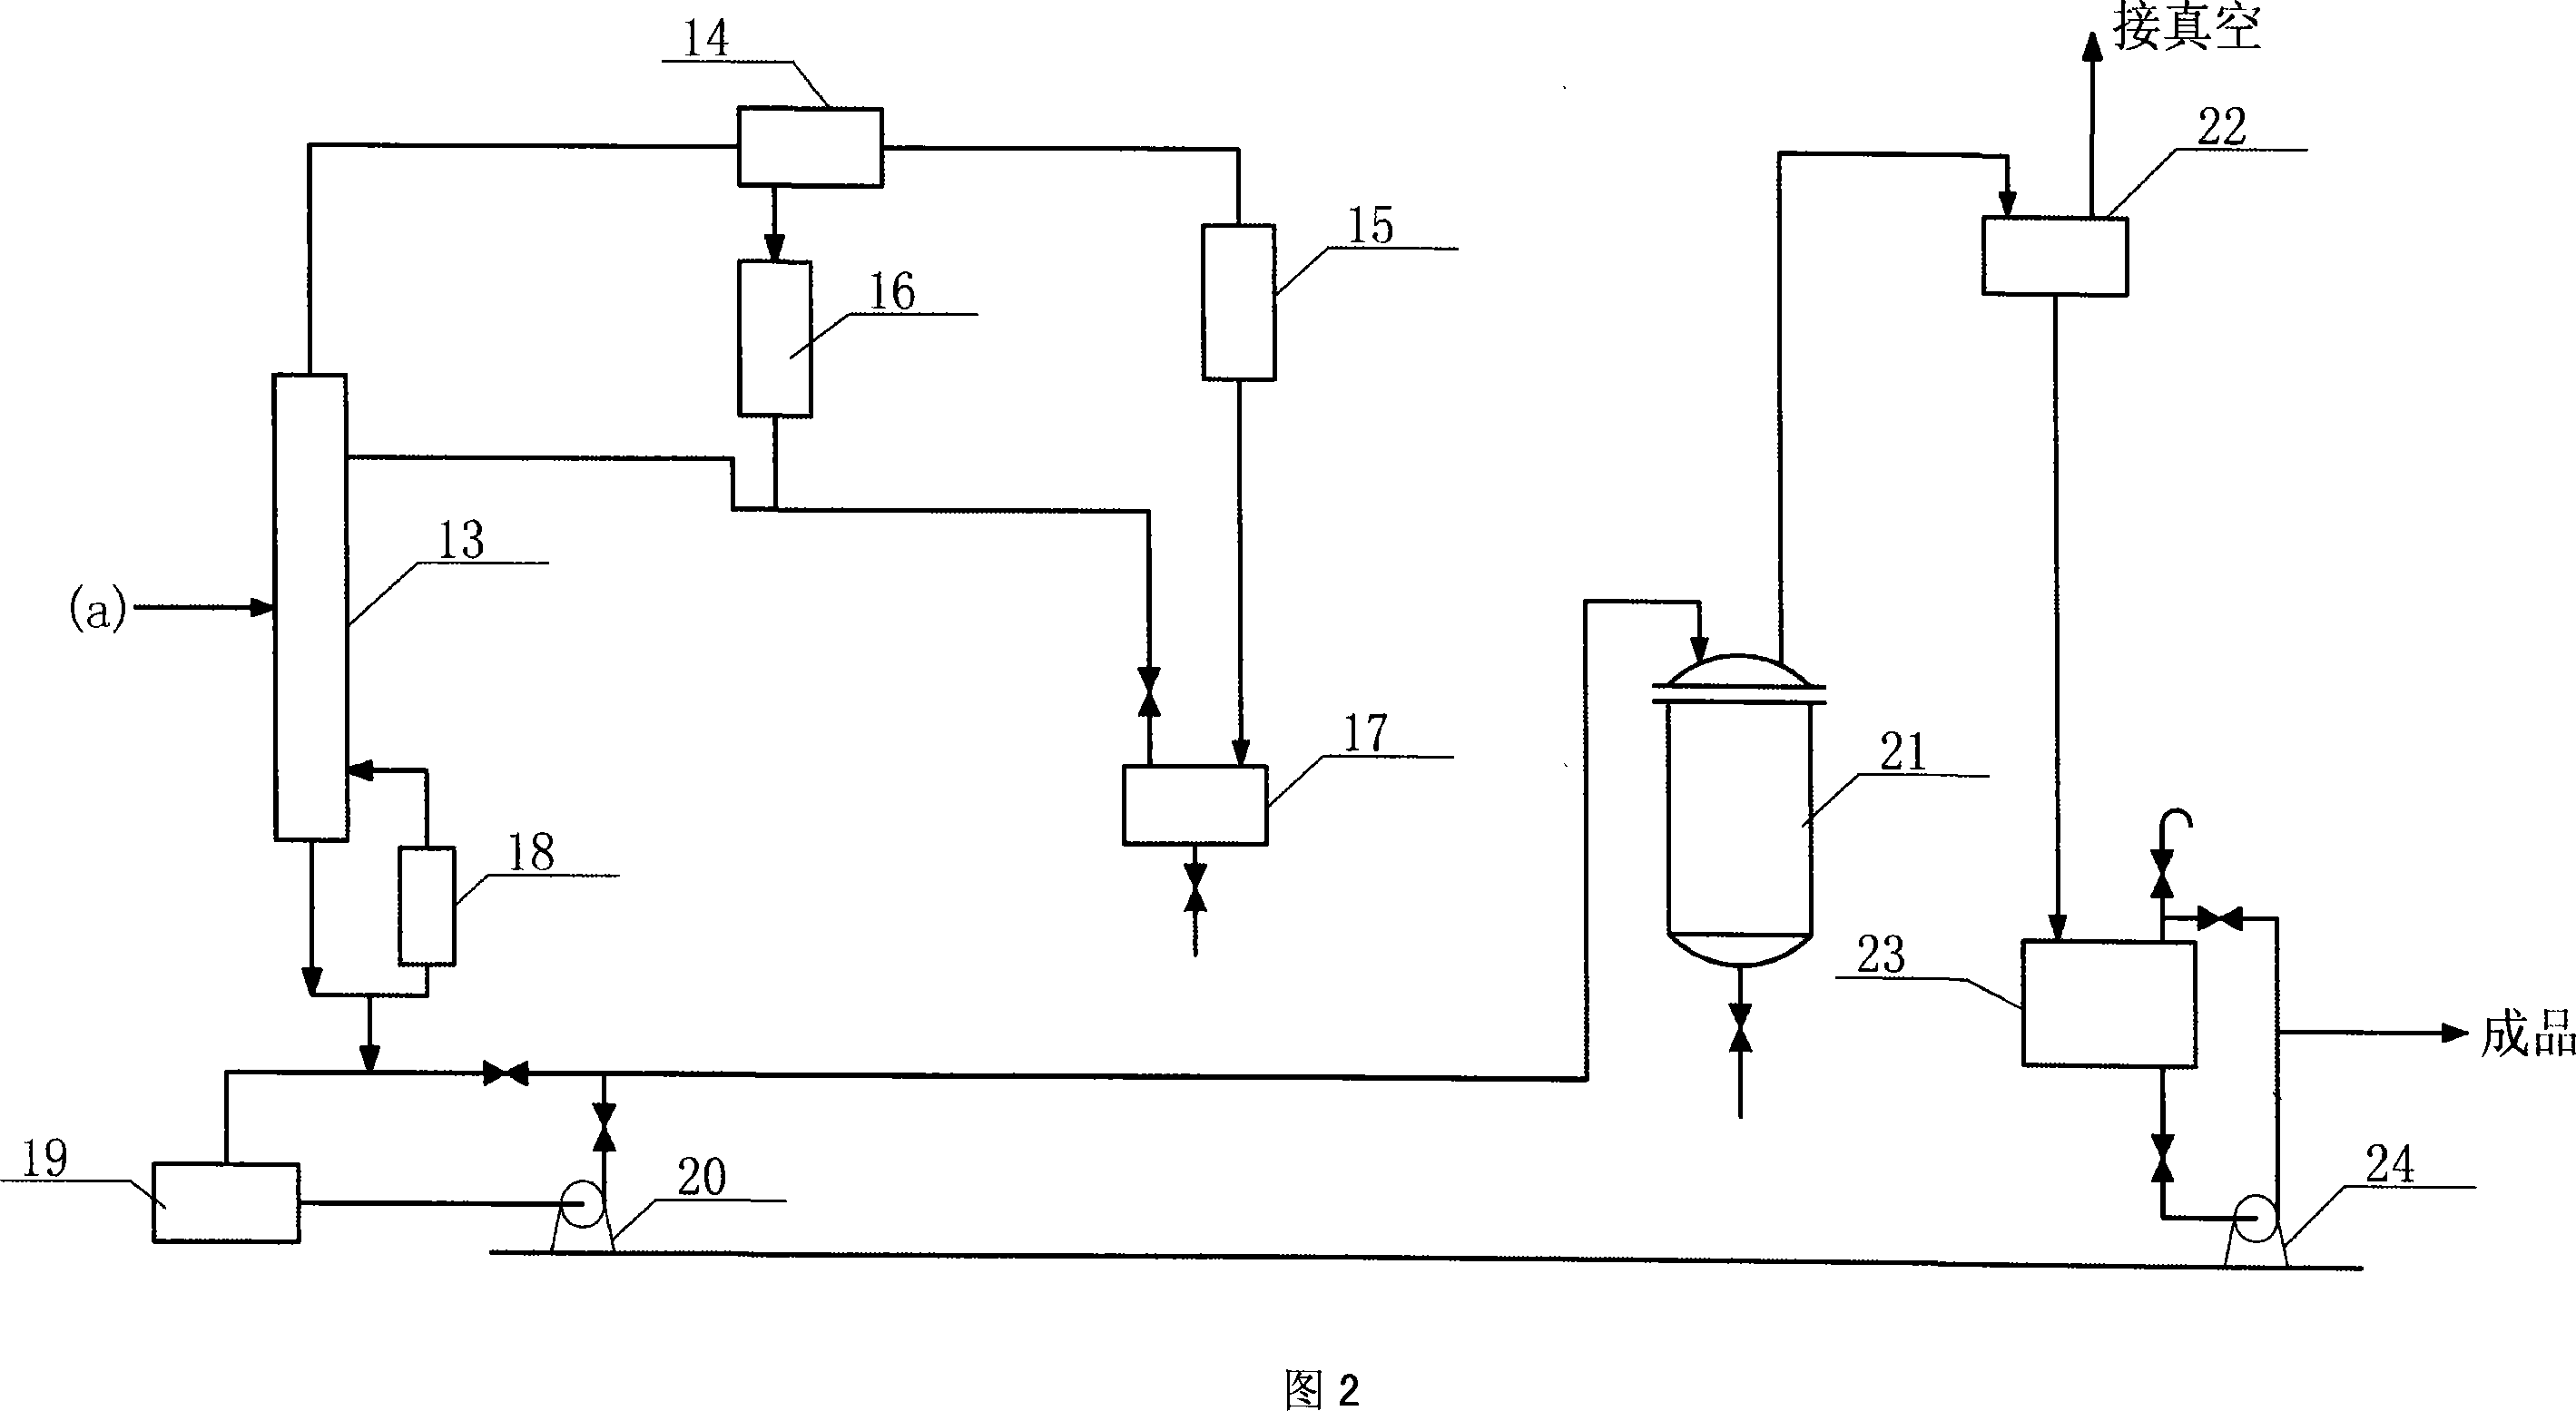 Method for preparing diethyl oxalate by coupling CO